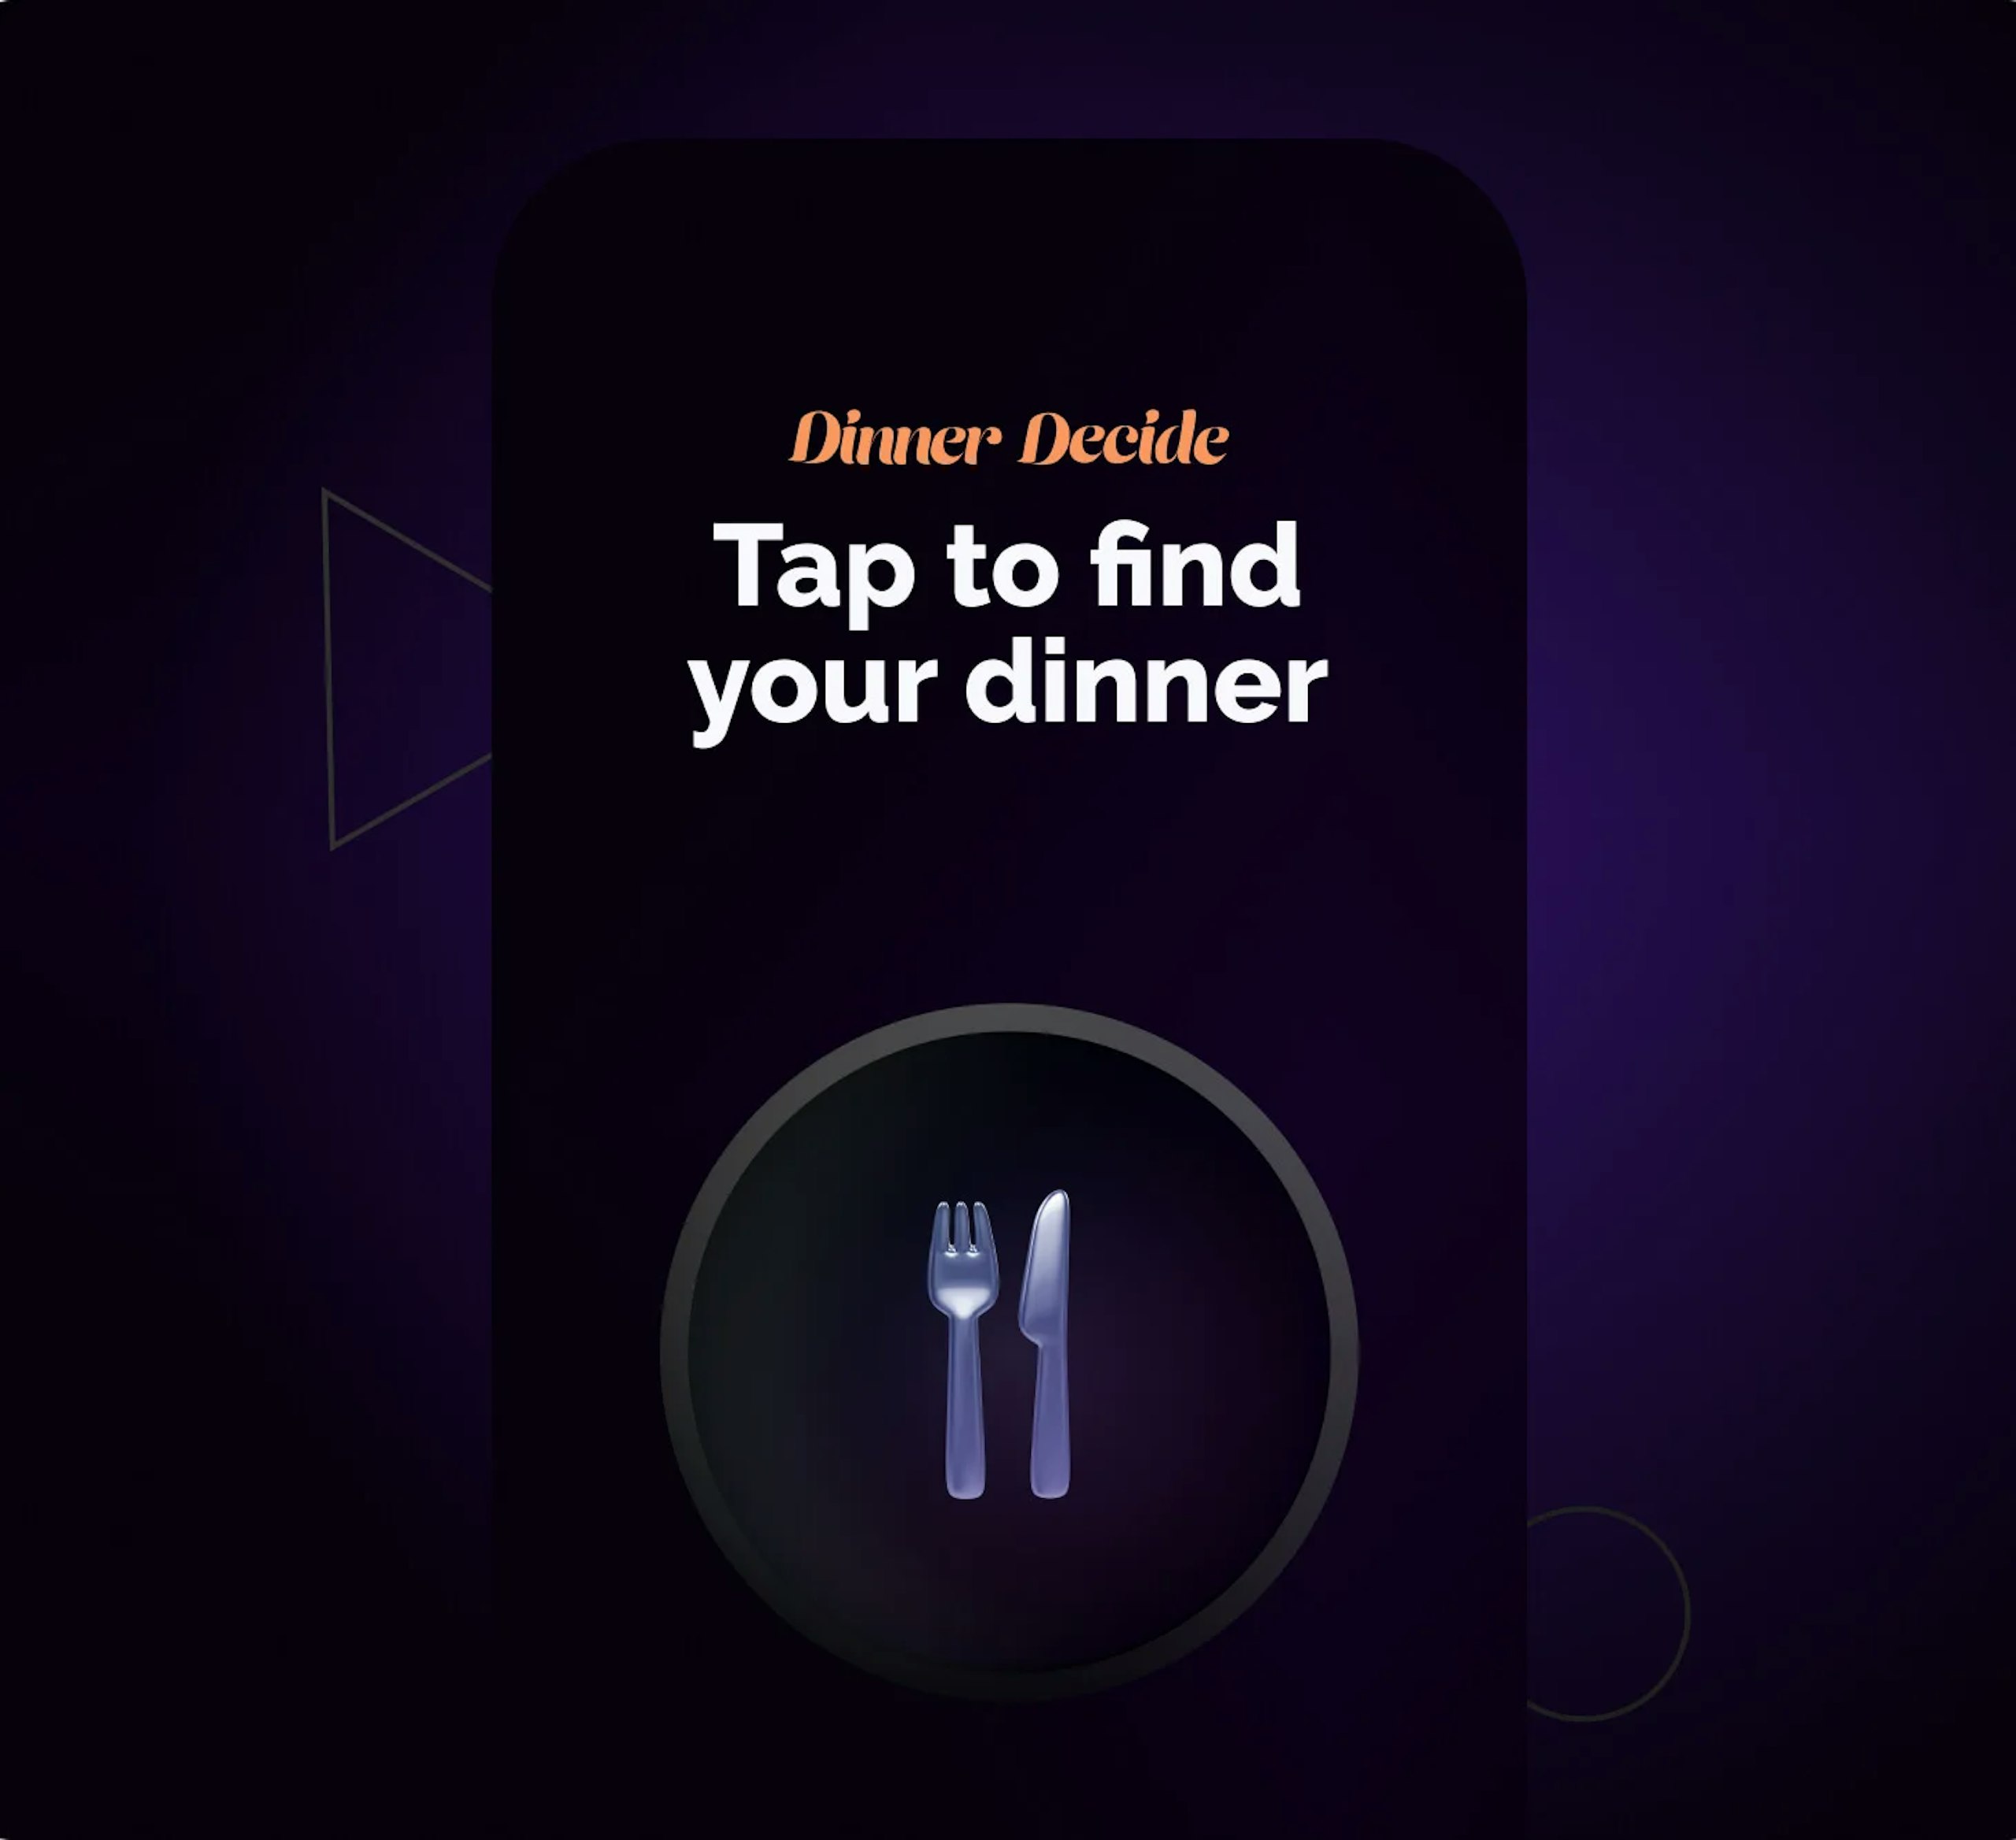 A photo of an iPhone mockup with the Dinner Decide website featured inside of it.